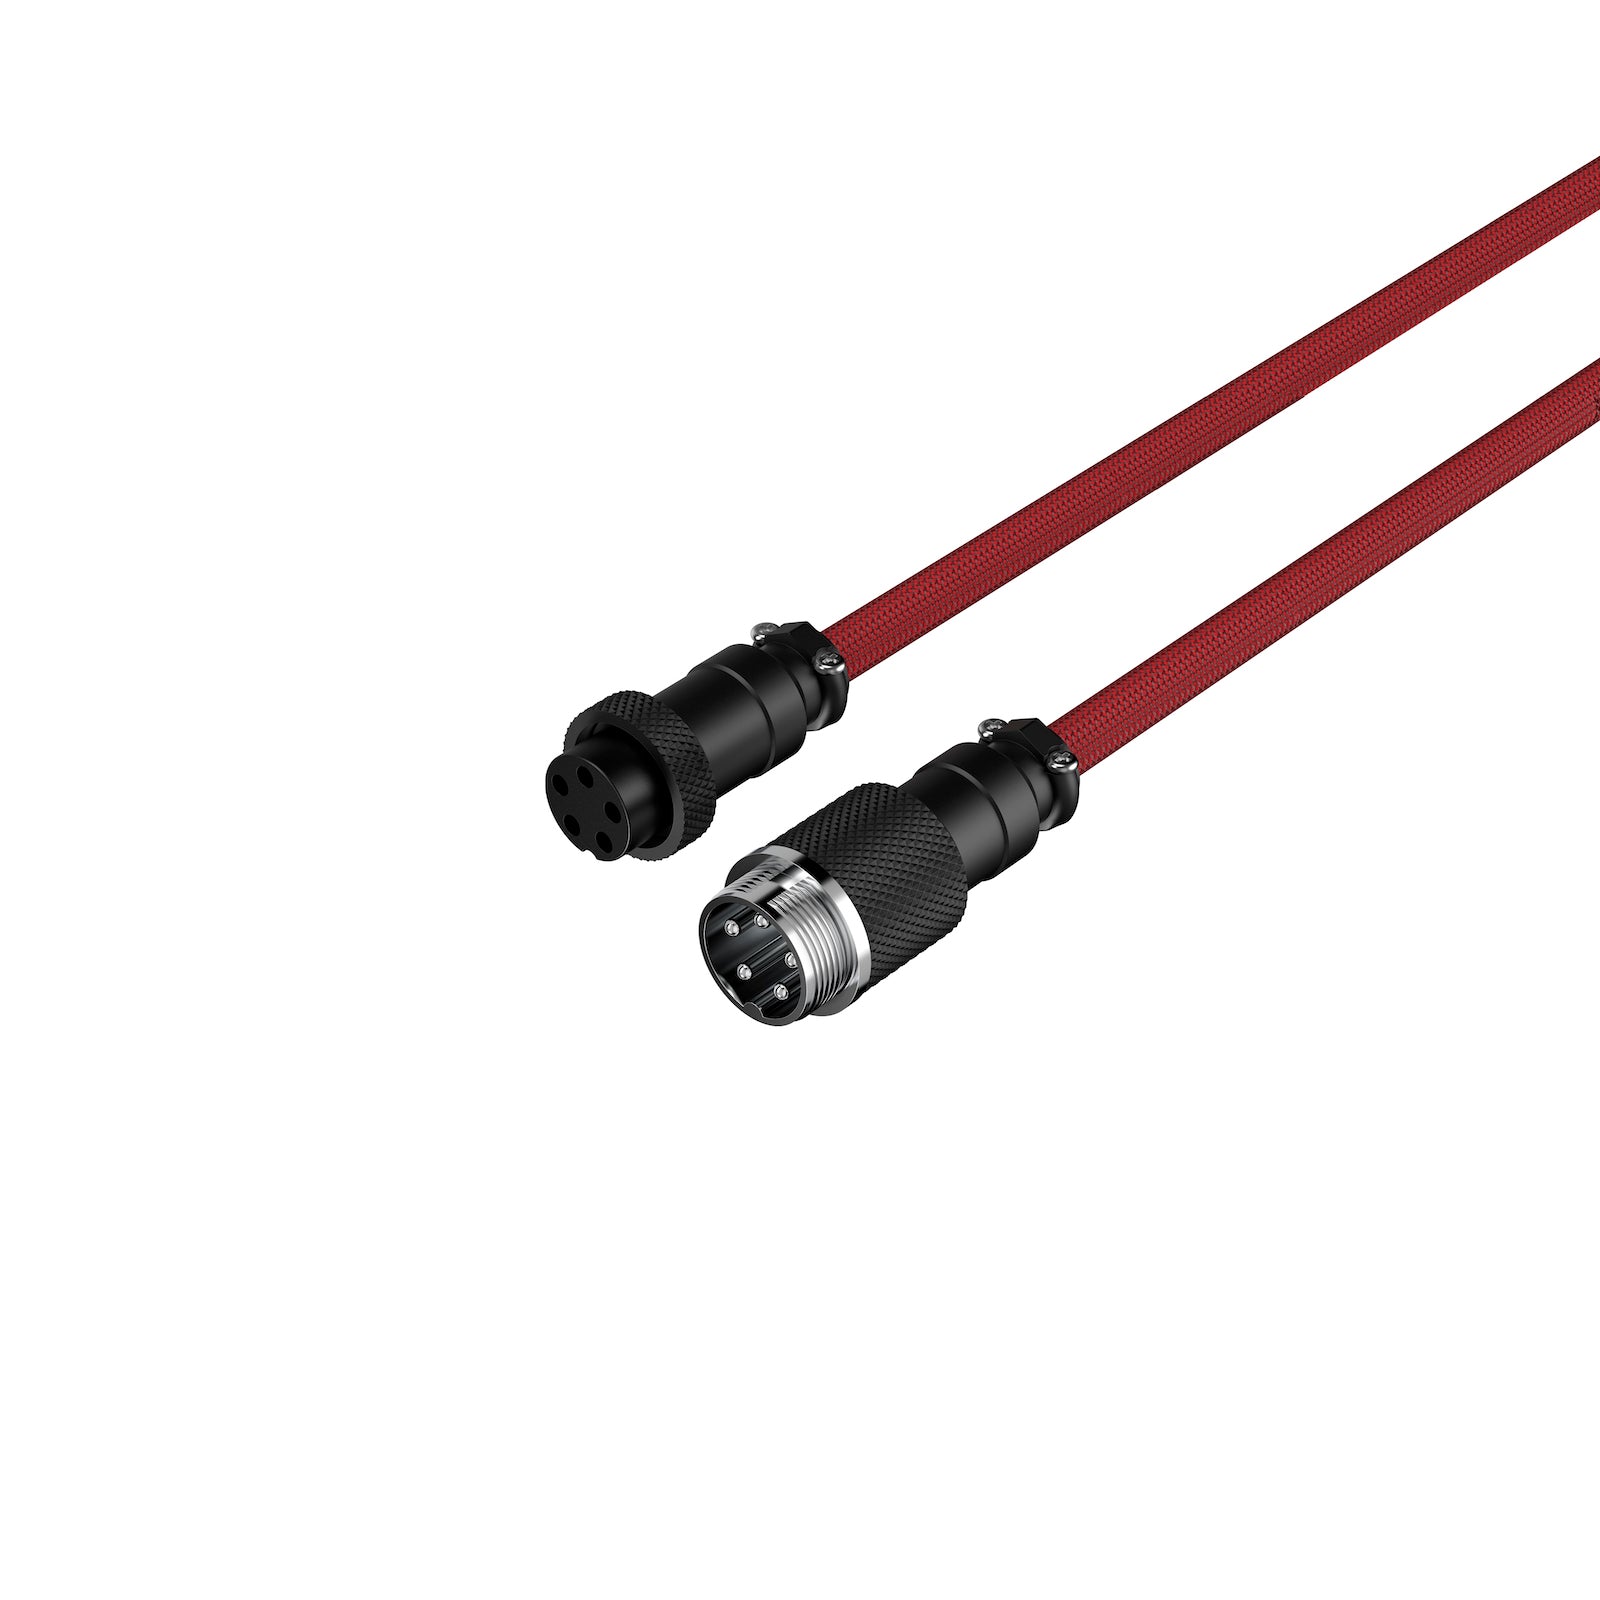 closeup view of HyperX Coiled Cable connectors in Red and Black